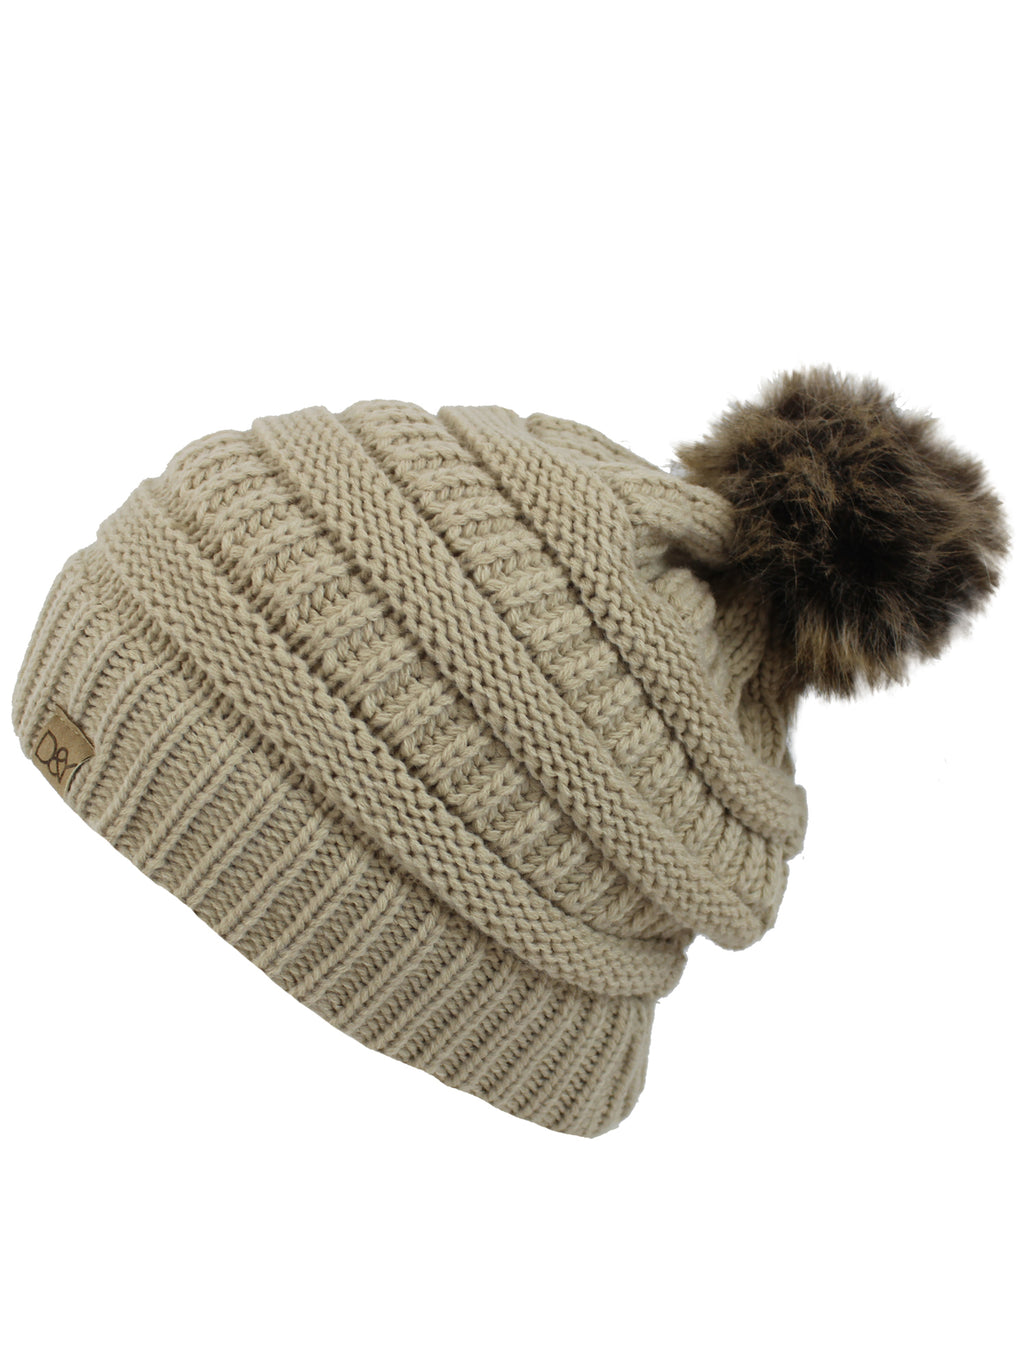 Beige Halo Ribbed Slouch Cap Hat With Fur Pom Pom